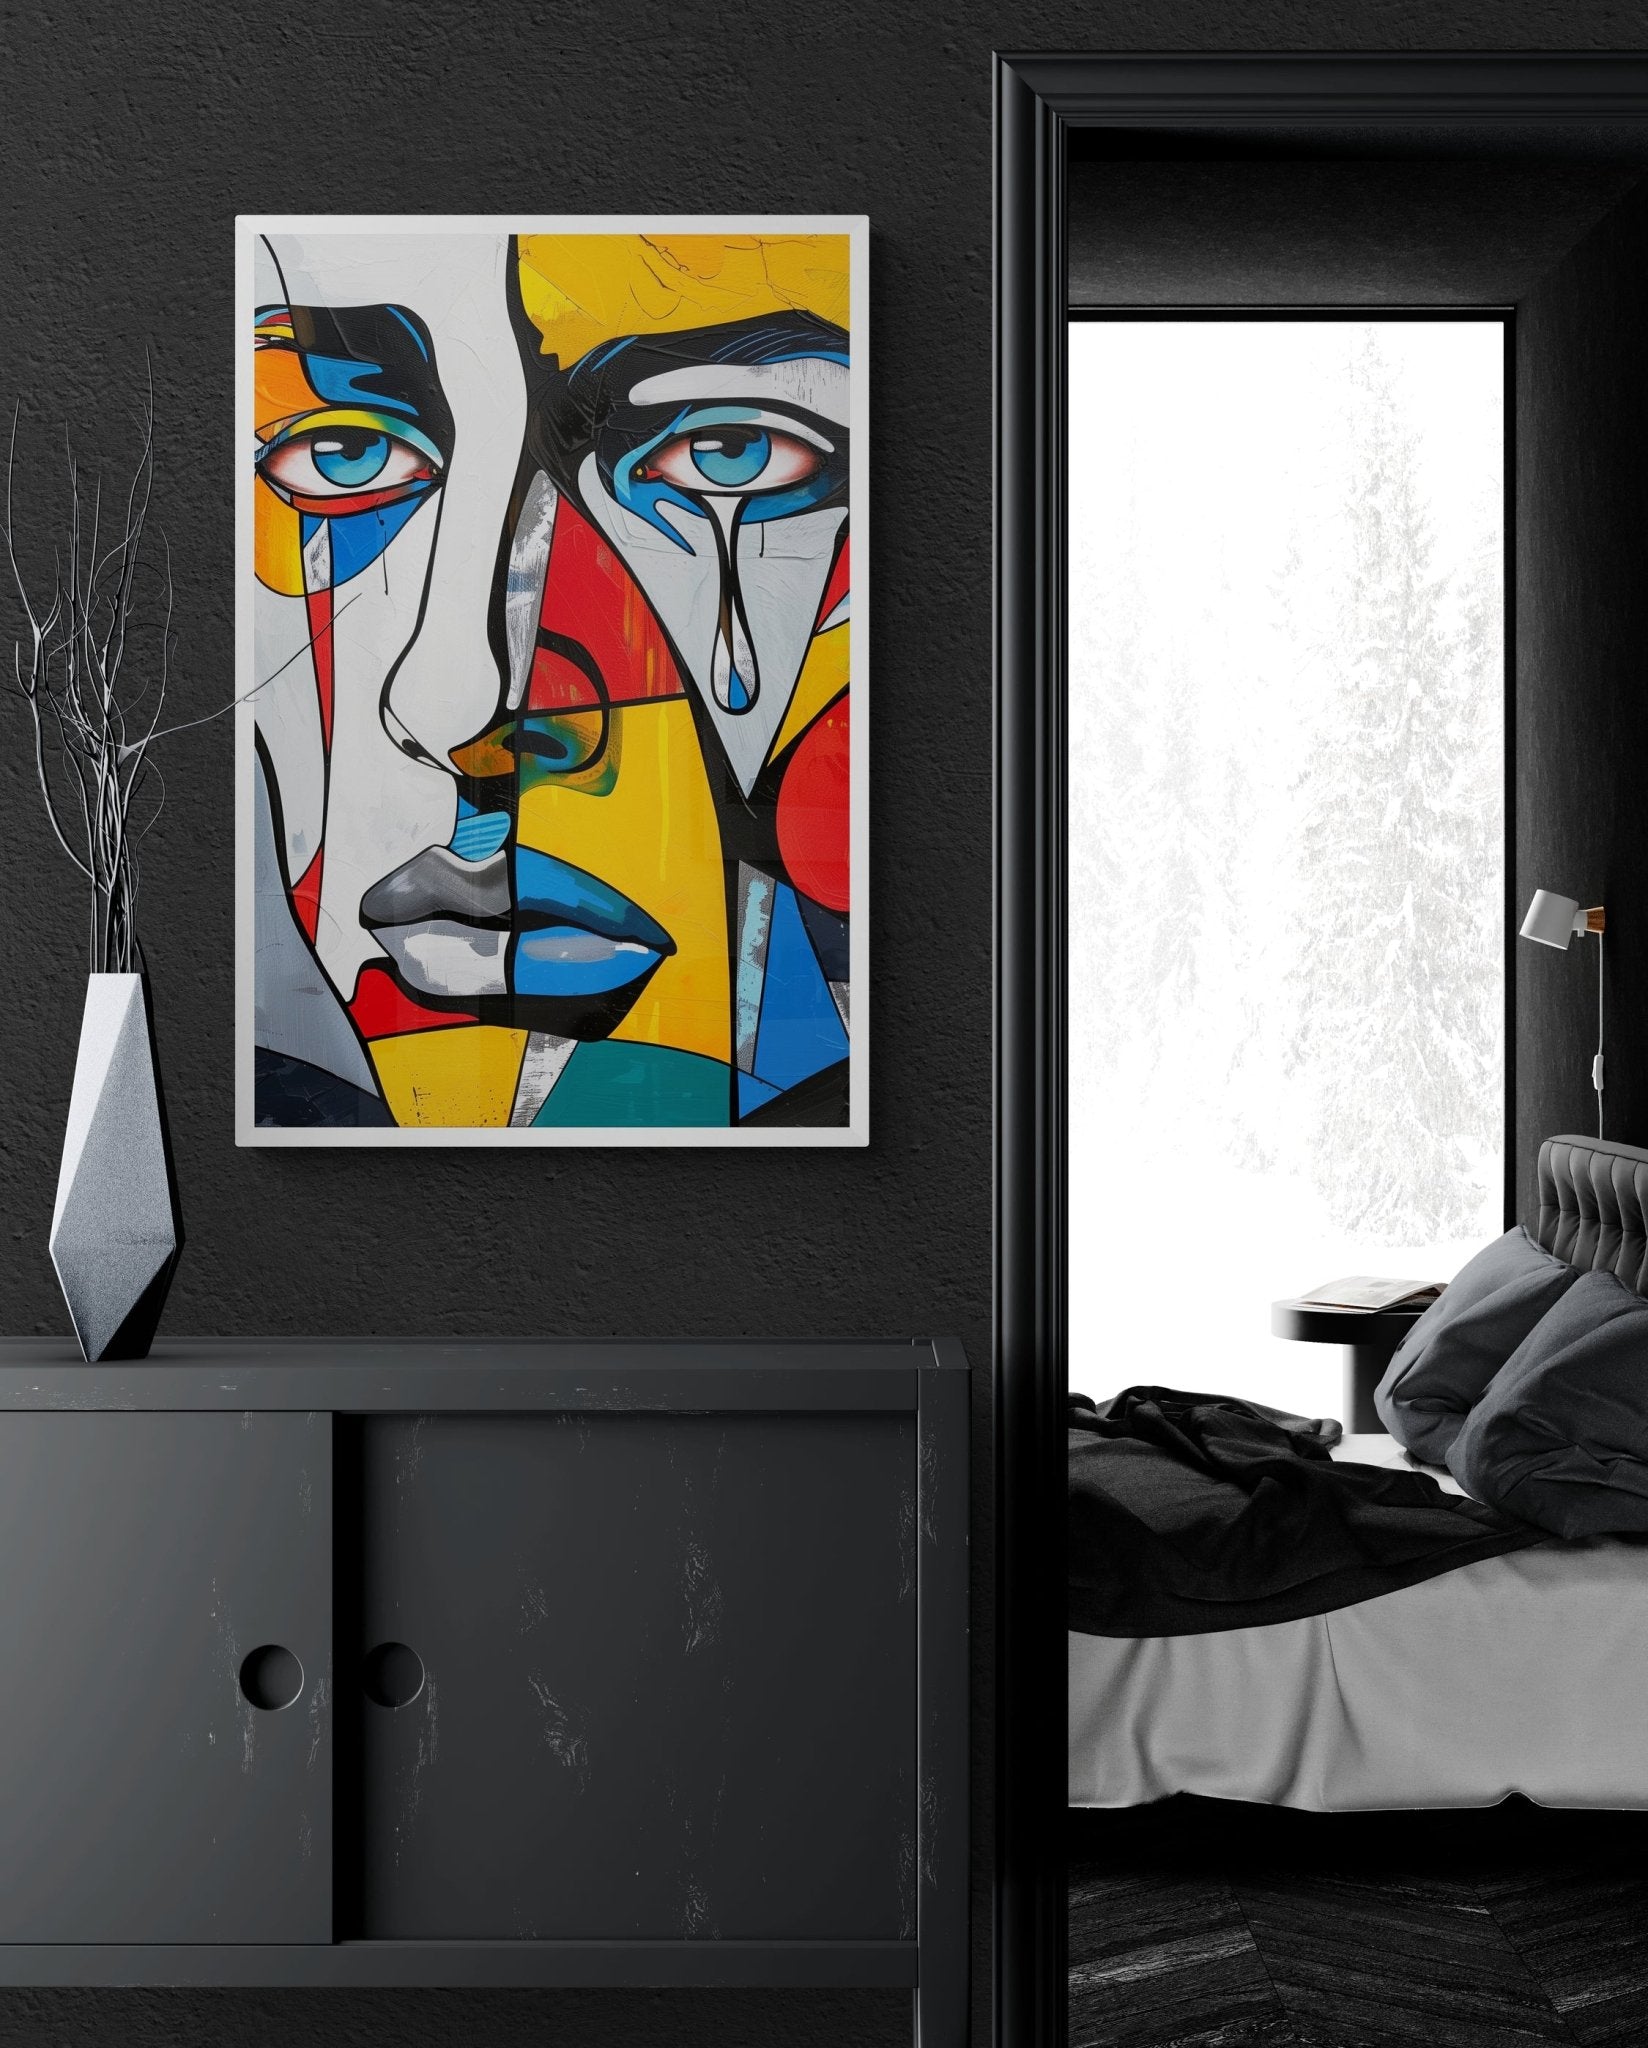 Modern abstract face painting with bold blue, yellow, and red accents from Milton Wes Art, bringing a touch of contemporary artistry to a sleek bedroom with dark walls and winter scenery visible through the window.